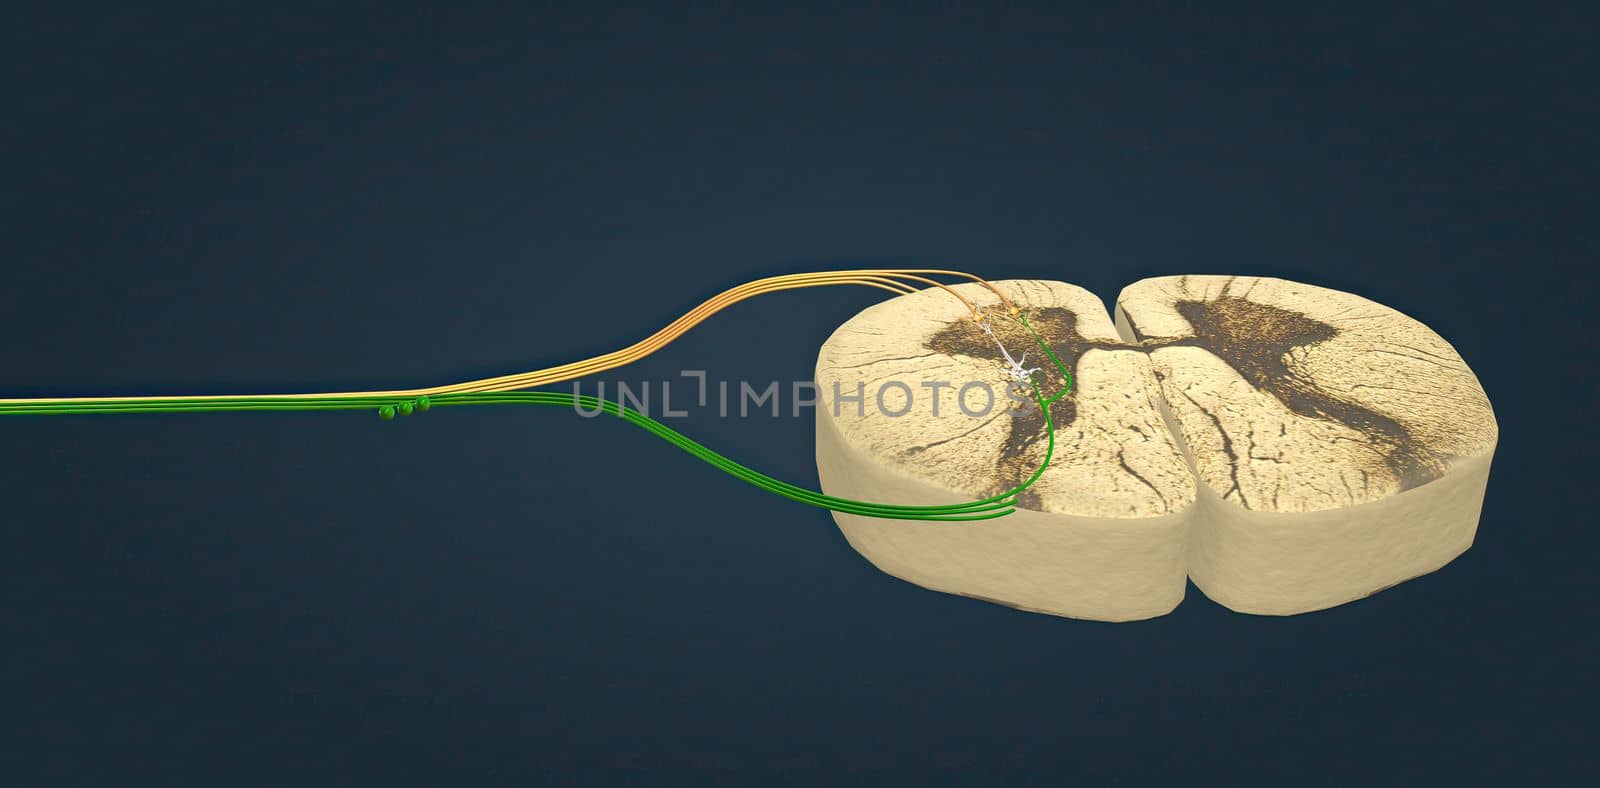 The spinal cord consists of a column of nervous tissue that runs from the brainstem through the central column of the spine 3D illustration